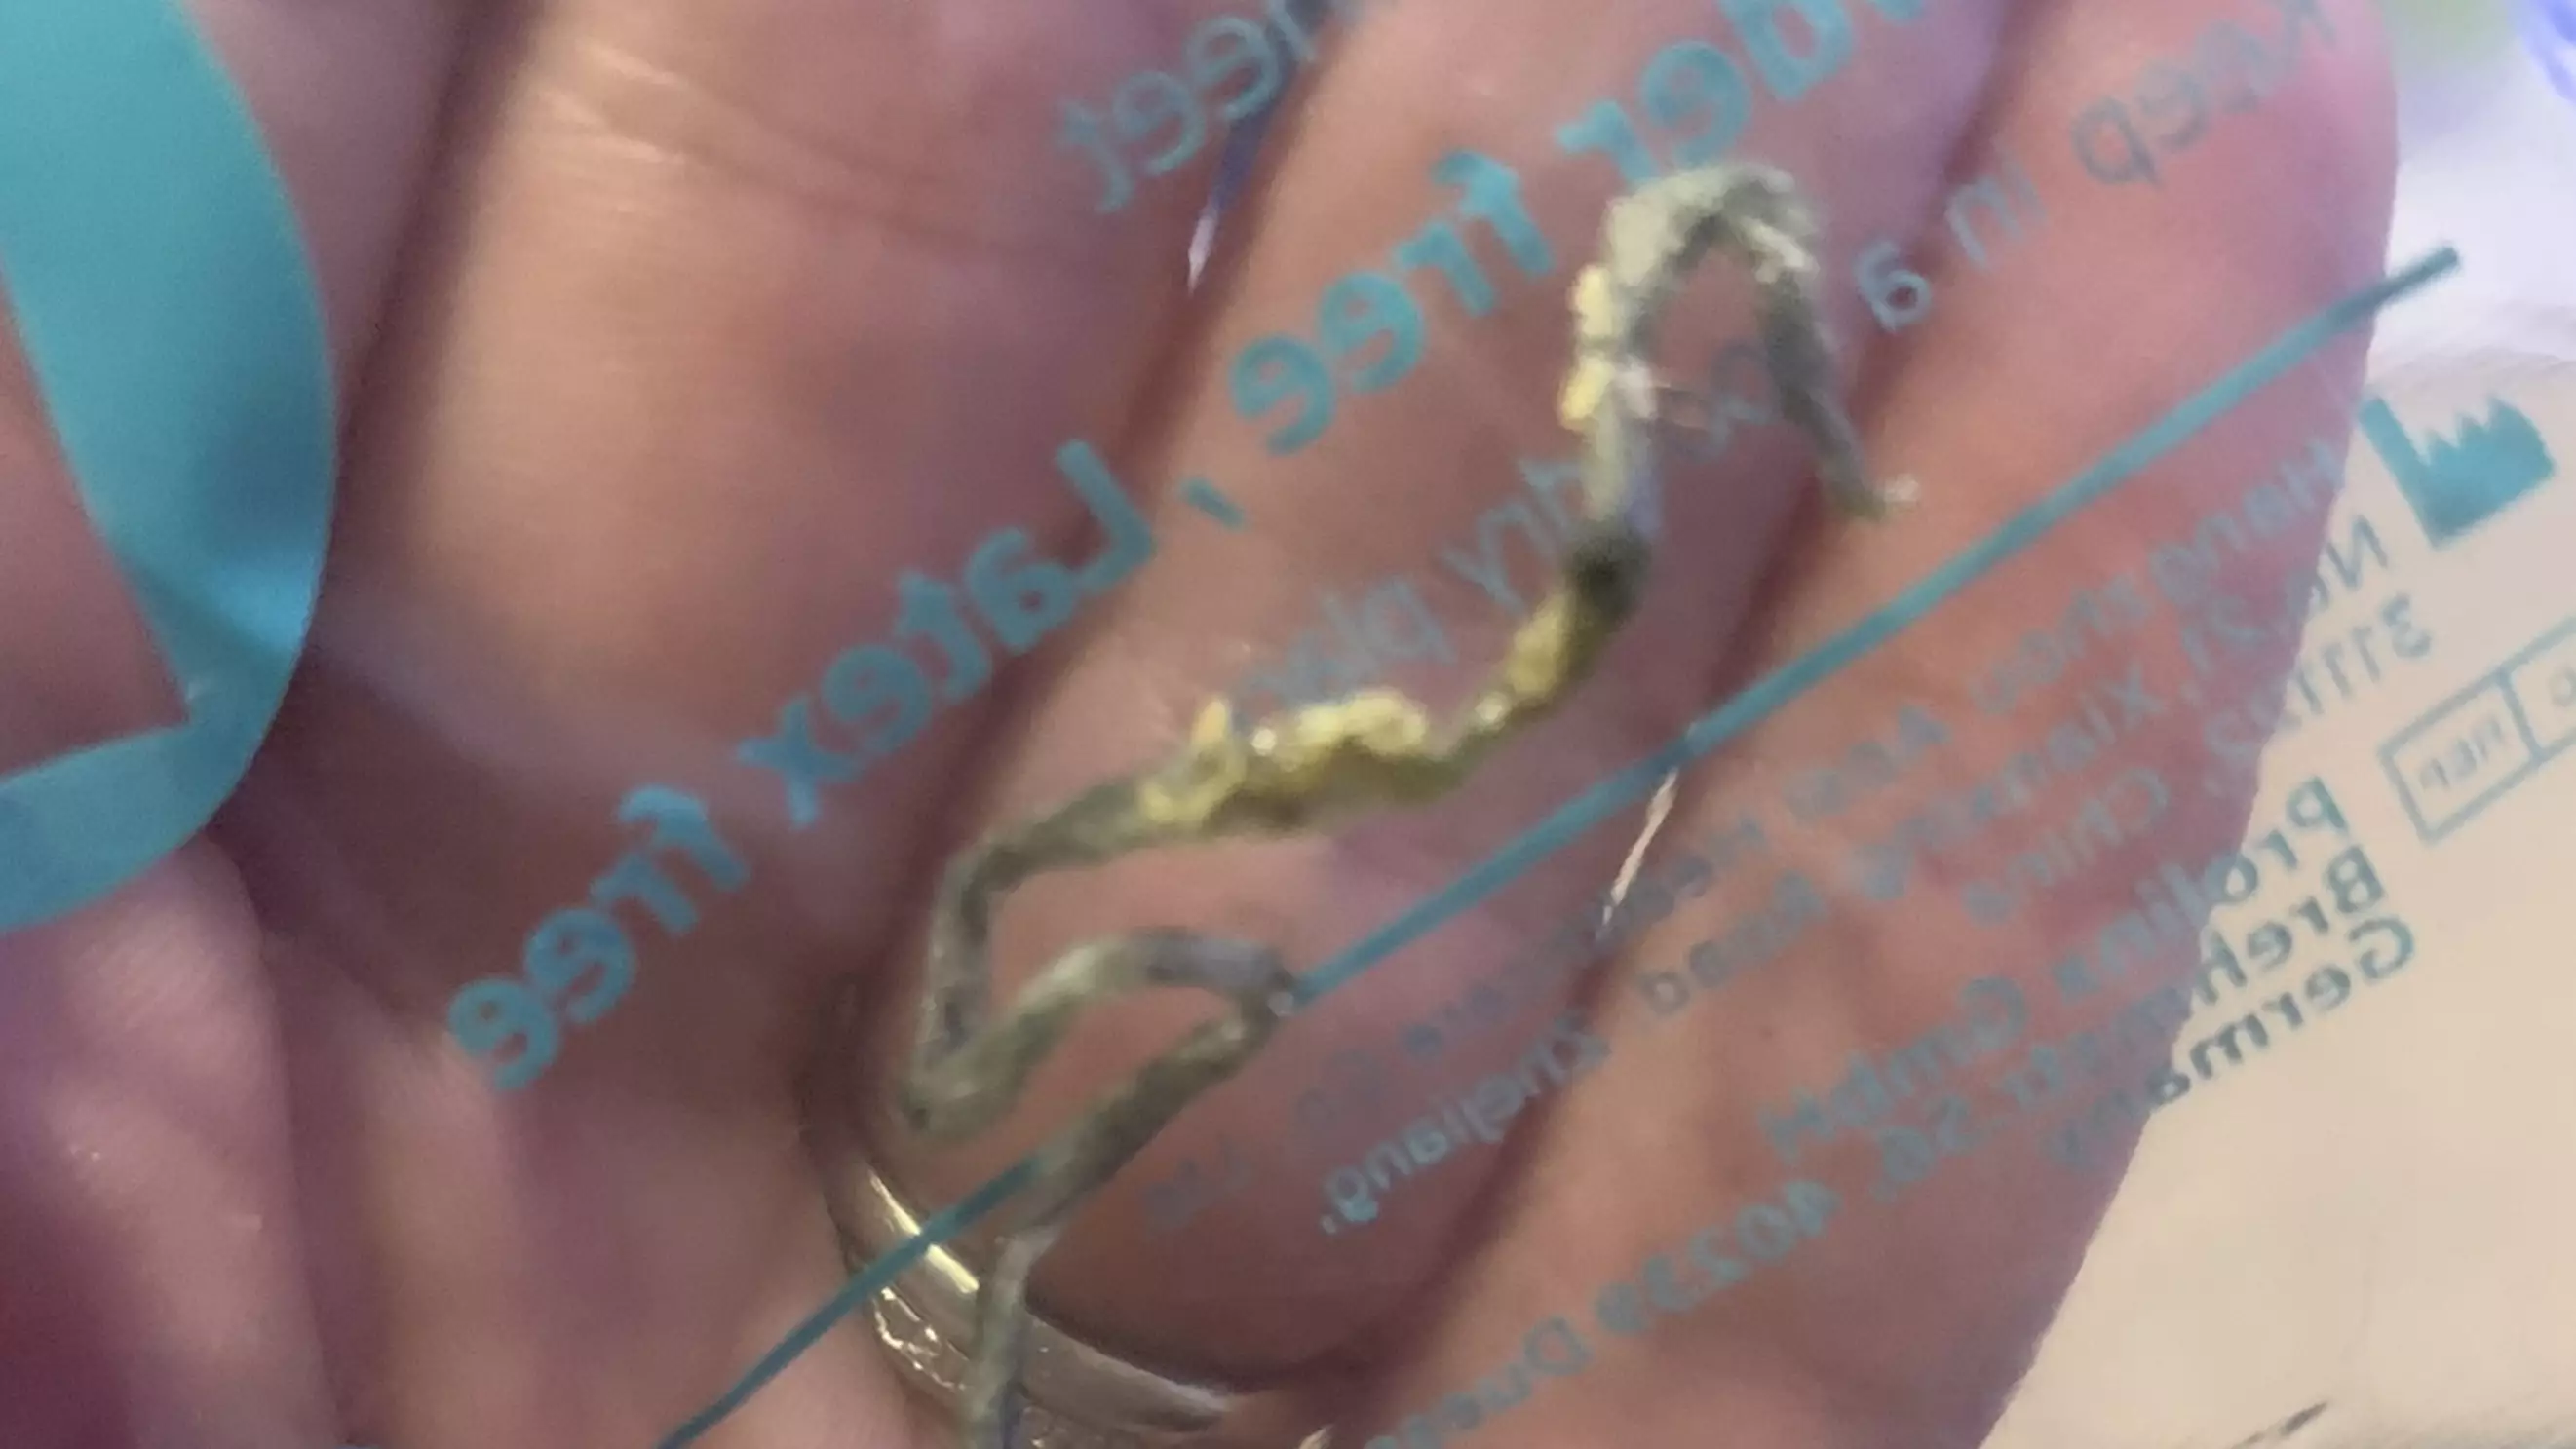 Mum Rushes Son To Doctors After Pulling Out 'Brain-Worm' Only To Discover It Was Tape